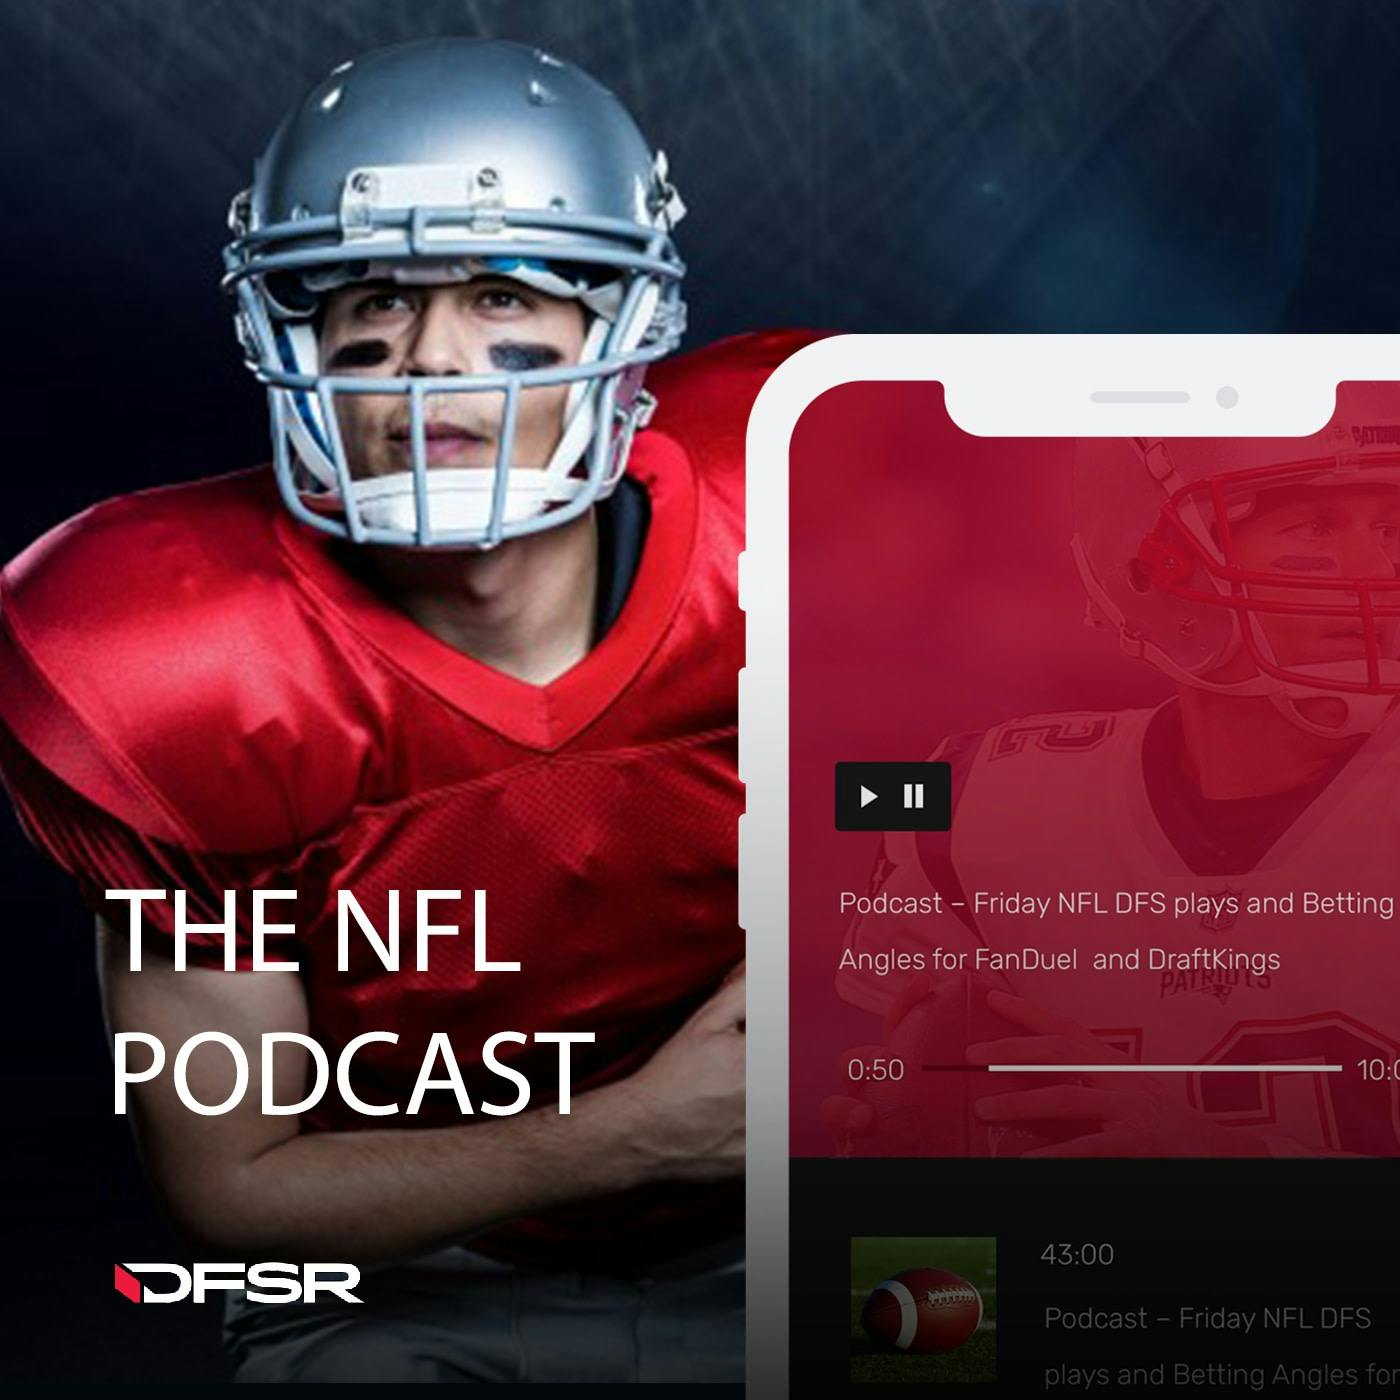 NFL Podcast - Betting Angles, Prop Bets and More for the Big Game 2/1/19